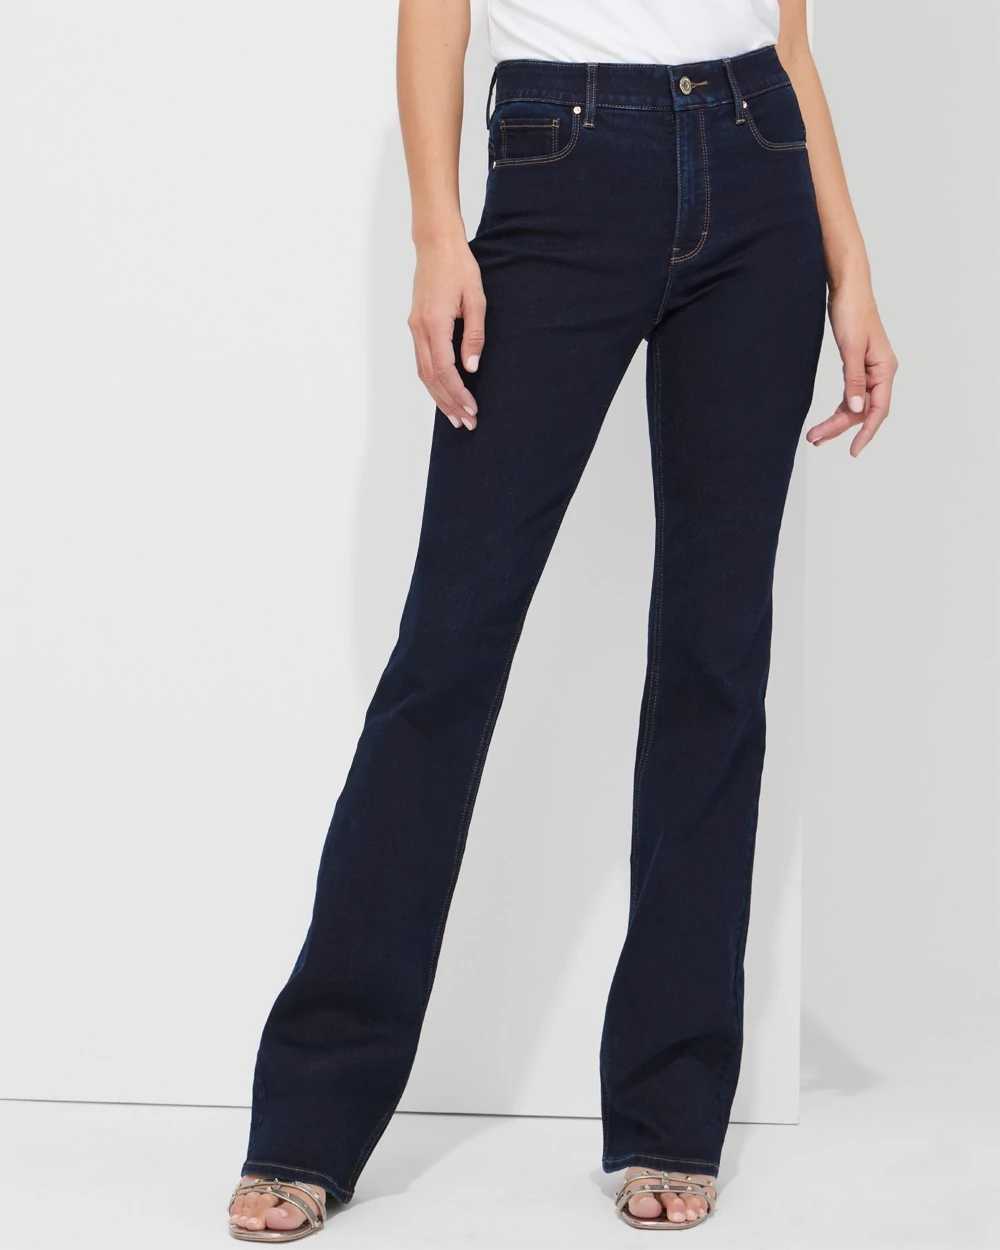 Outlet WHBM High Rise Skinny Flare Jeans click to view larger image.